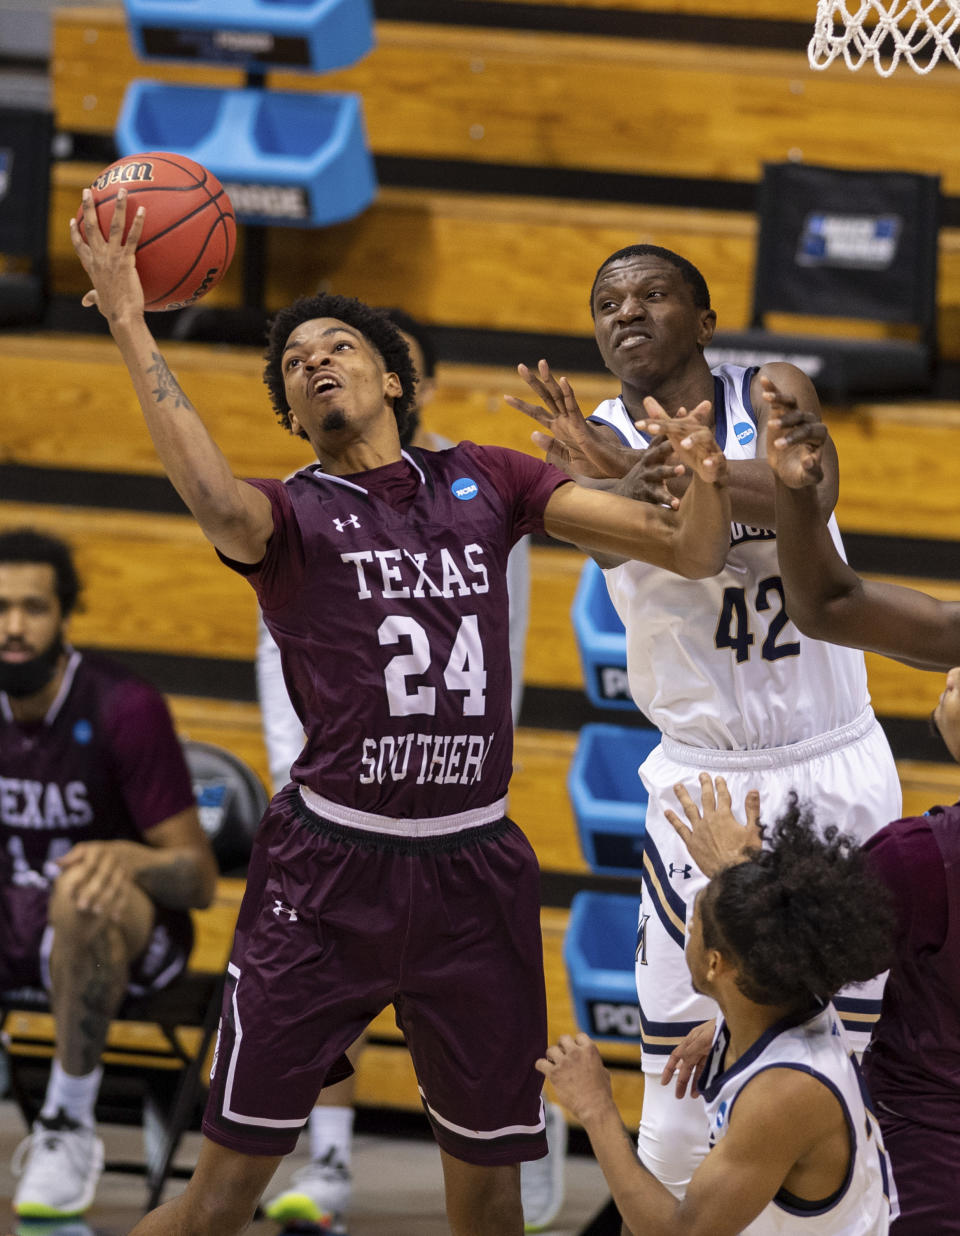 Texas Southern forward John Walker III (24) grabs a rebound next to Mount St. Mary's forward Malik Jefferson (42) during the second half of a First Four game in the NCAA men's college basketball tournament Thursday, March 18, 2021, in Bloomington, Ind. (AP Photo/Doug McSchooler)